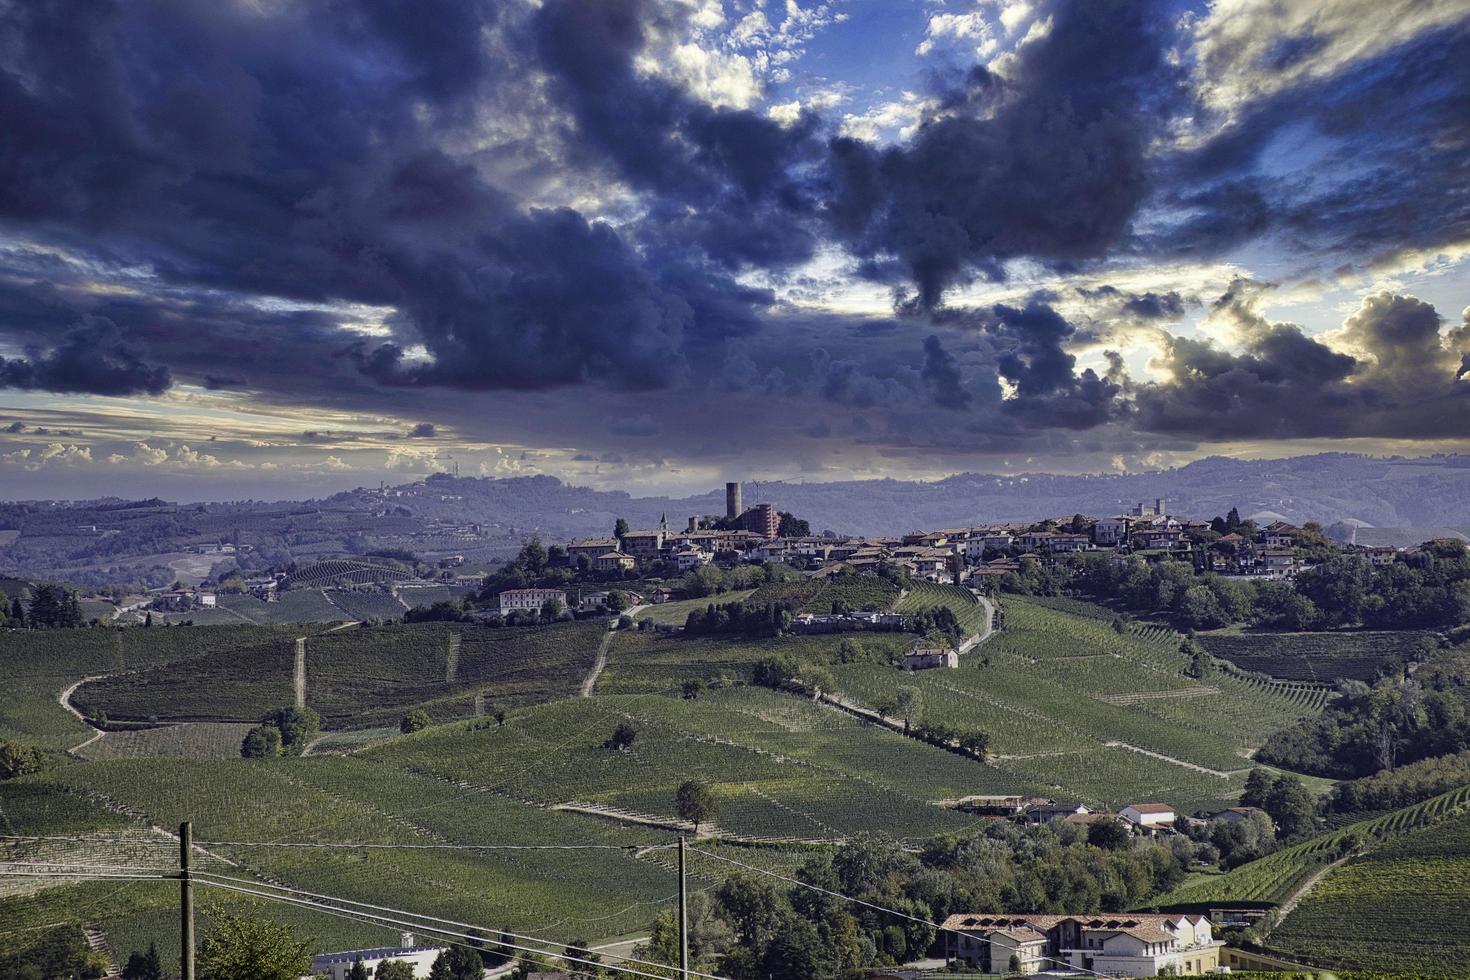 landscapes of the Piedmontese Langhe during the harvest, with the bright colors of autumn photo